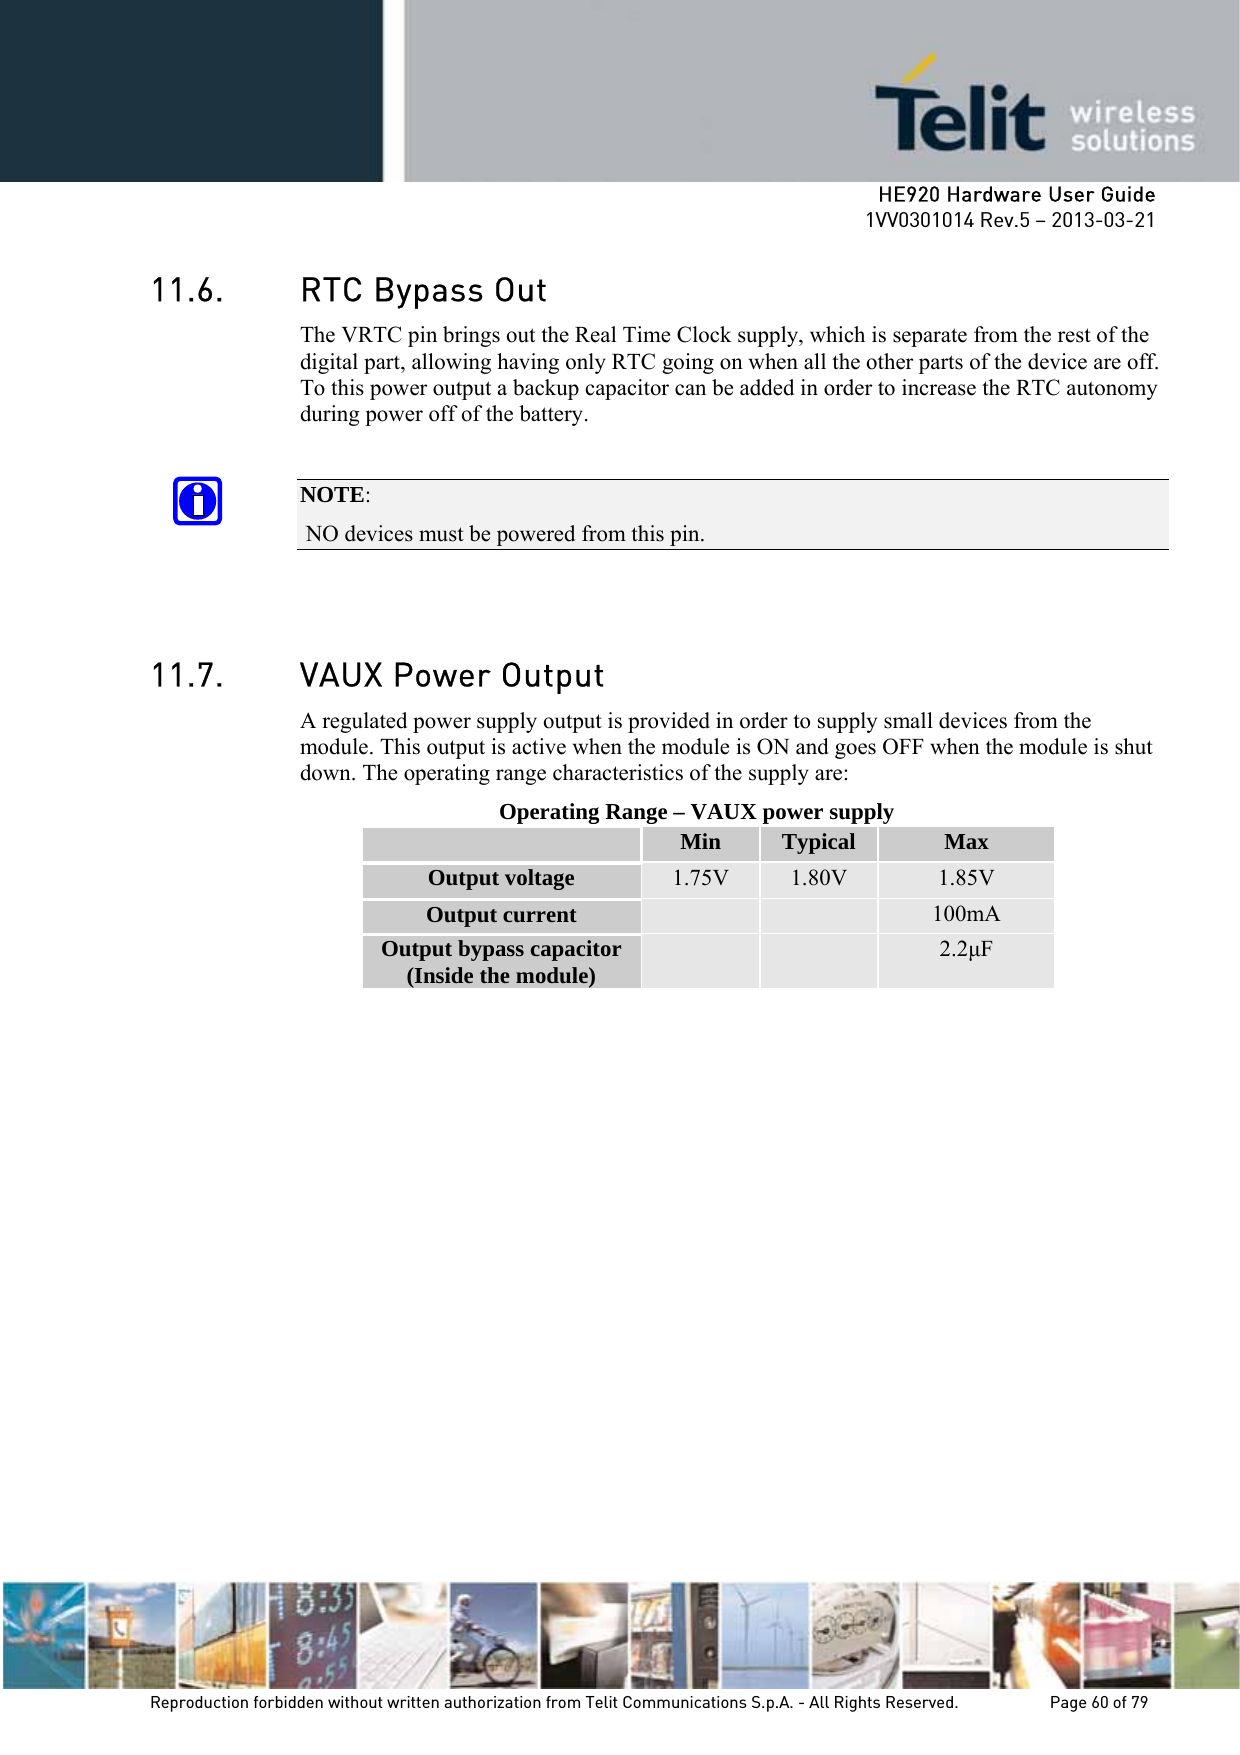     HE920 Hardware User Guide 1VV0301014 Rev.5 – 2013-03-21 Reproduction forbidden without written authorization from Telit Communications S.p.A. - All Rights Reserved.    Page 60 of 79  11.6. RTC Bypass Out The VRTC pin brings out the Real Time Clock supply, which is separate from the rest of the digital part, allowing having only RTC going on when all the other parts of the device are off. To this power output a backup capacitor can be added in order to increase the RTC autonomy during power off of the battery.   NOTE:  NO devices must be powered from this pin.   11.7. VAUX Power Output A regulated power supply output is provided in order to supply small devices from the module. This output is active when the module is ON and goes OFF when the module is shut down. The operating range characteristics of the supply are: Operating Range – VAUX power supply  Min  Typical  Max Output voltage  1.75V  1.80V  1.85V Output current      100mA Output bypass capacitor (Inside the module)      2.2µF 